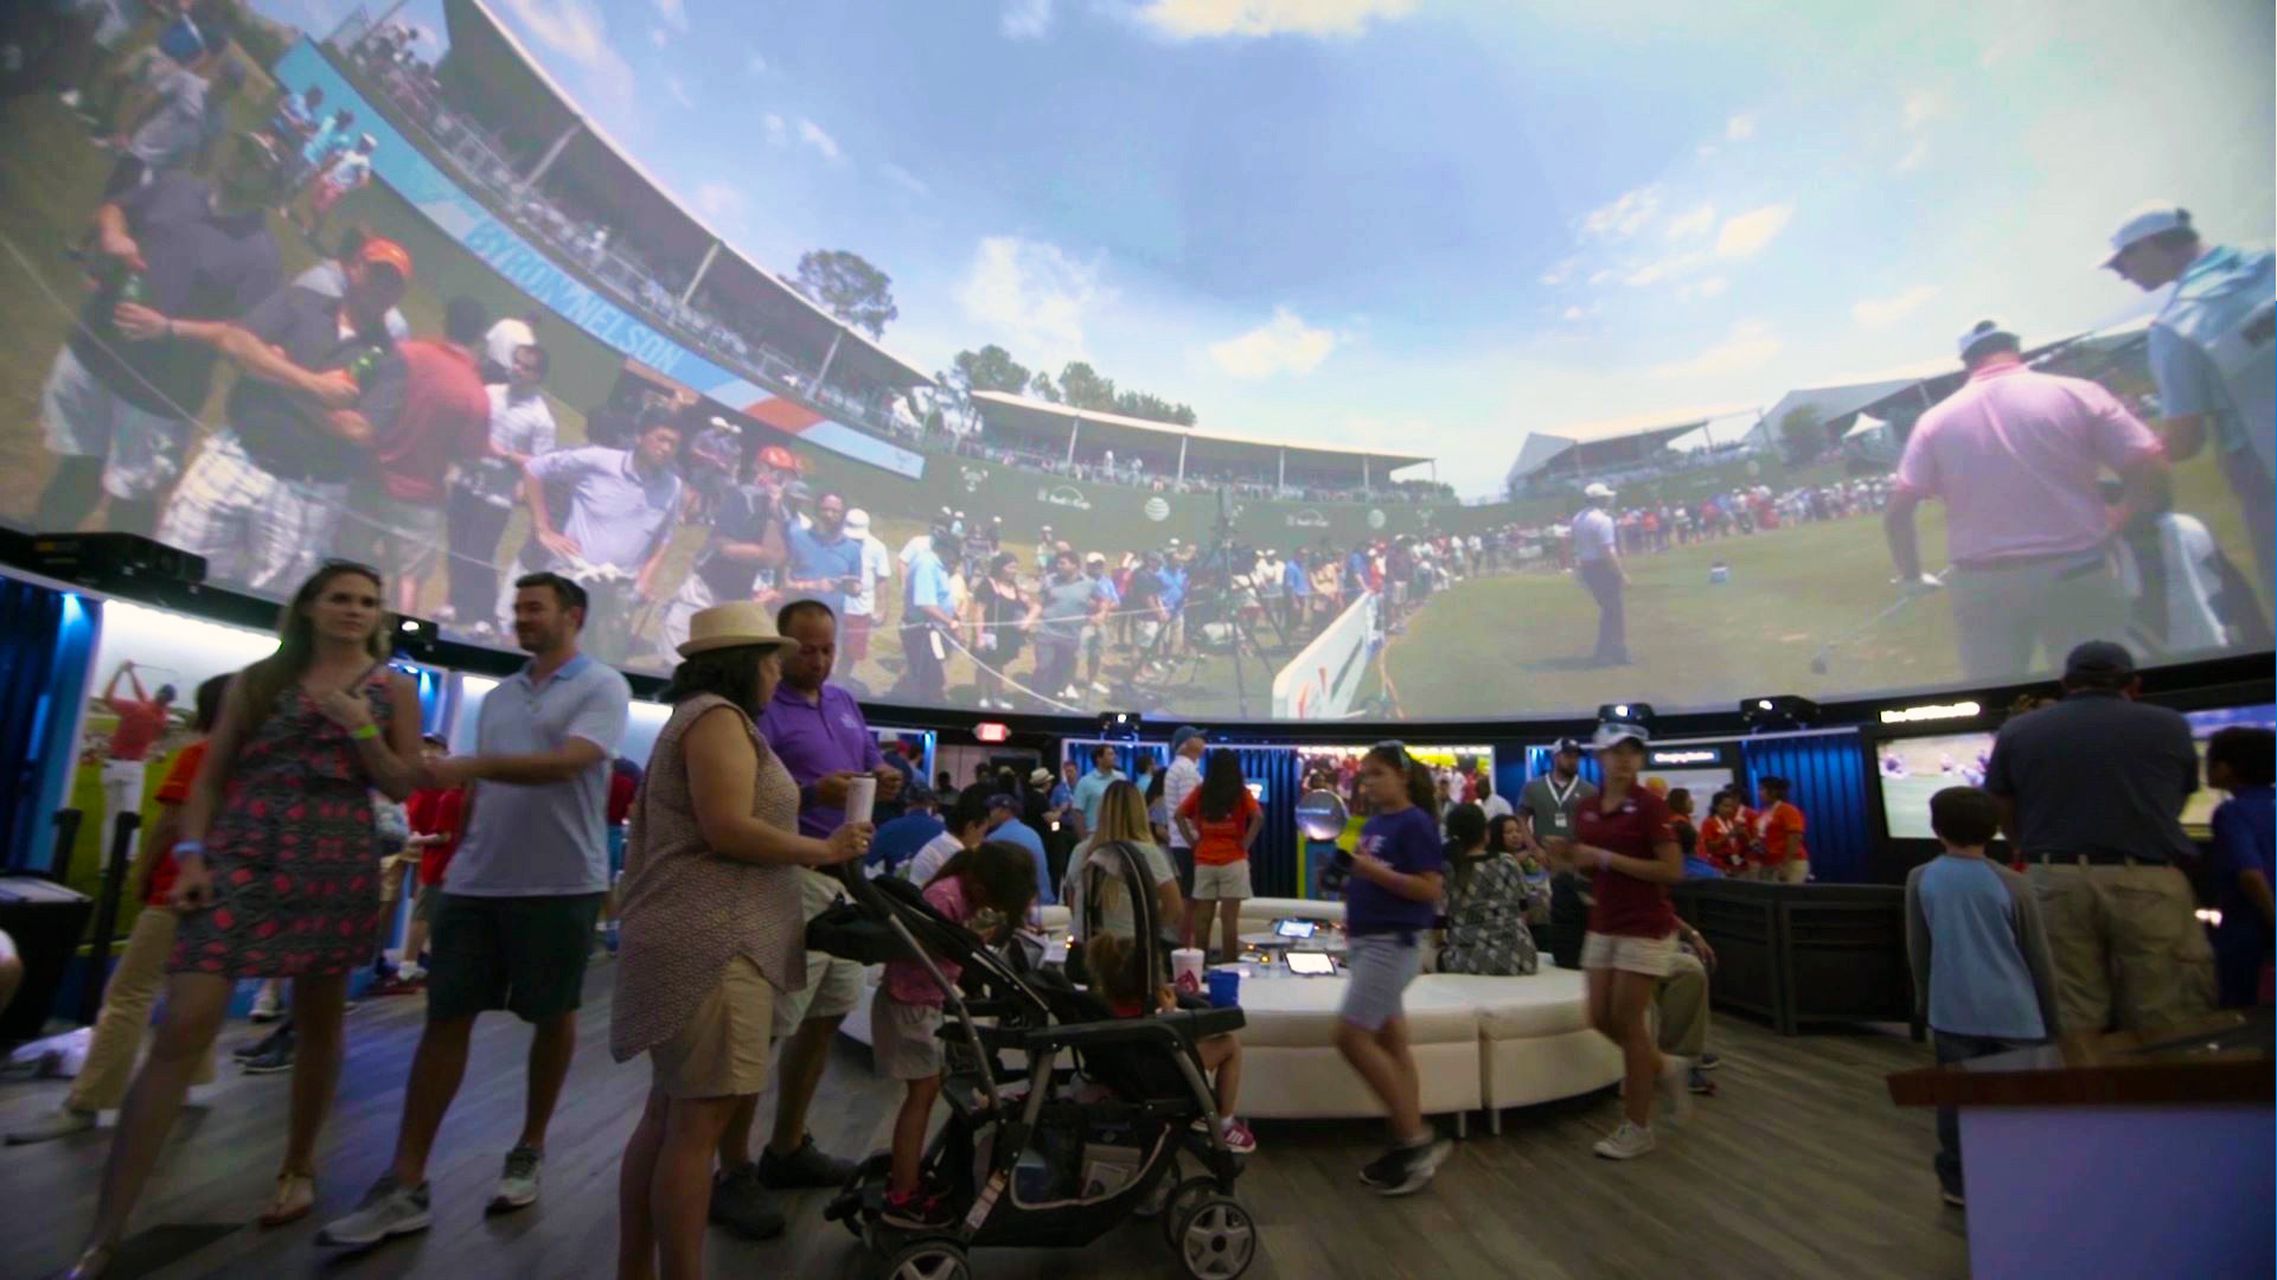 Dome projection at a PGA TOUR event